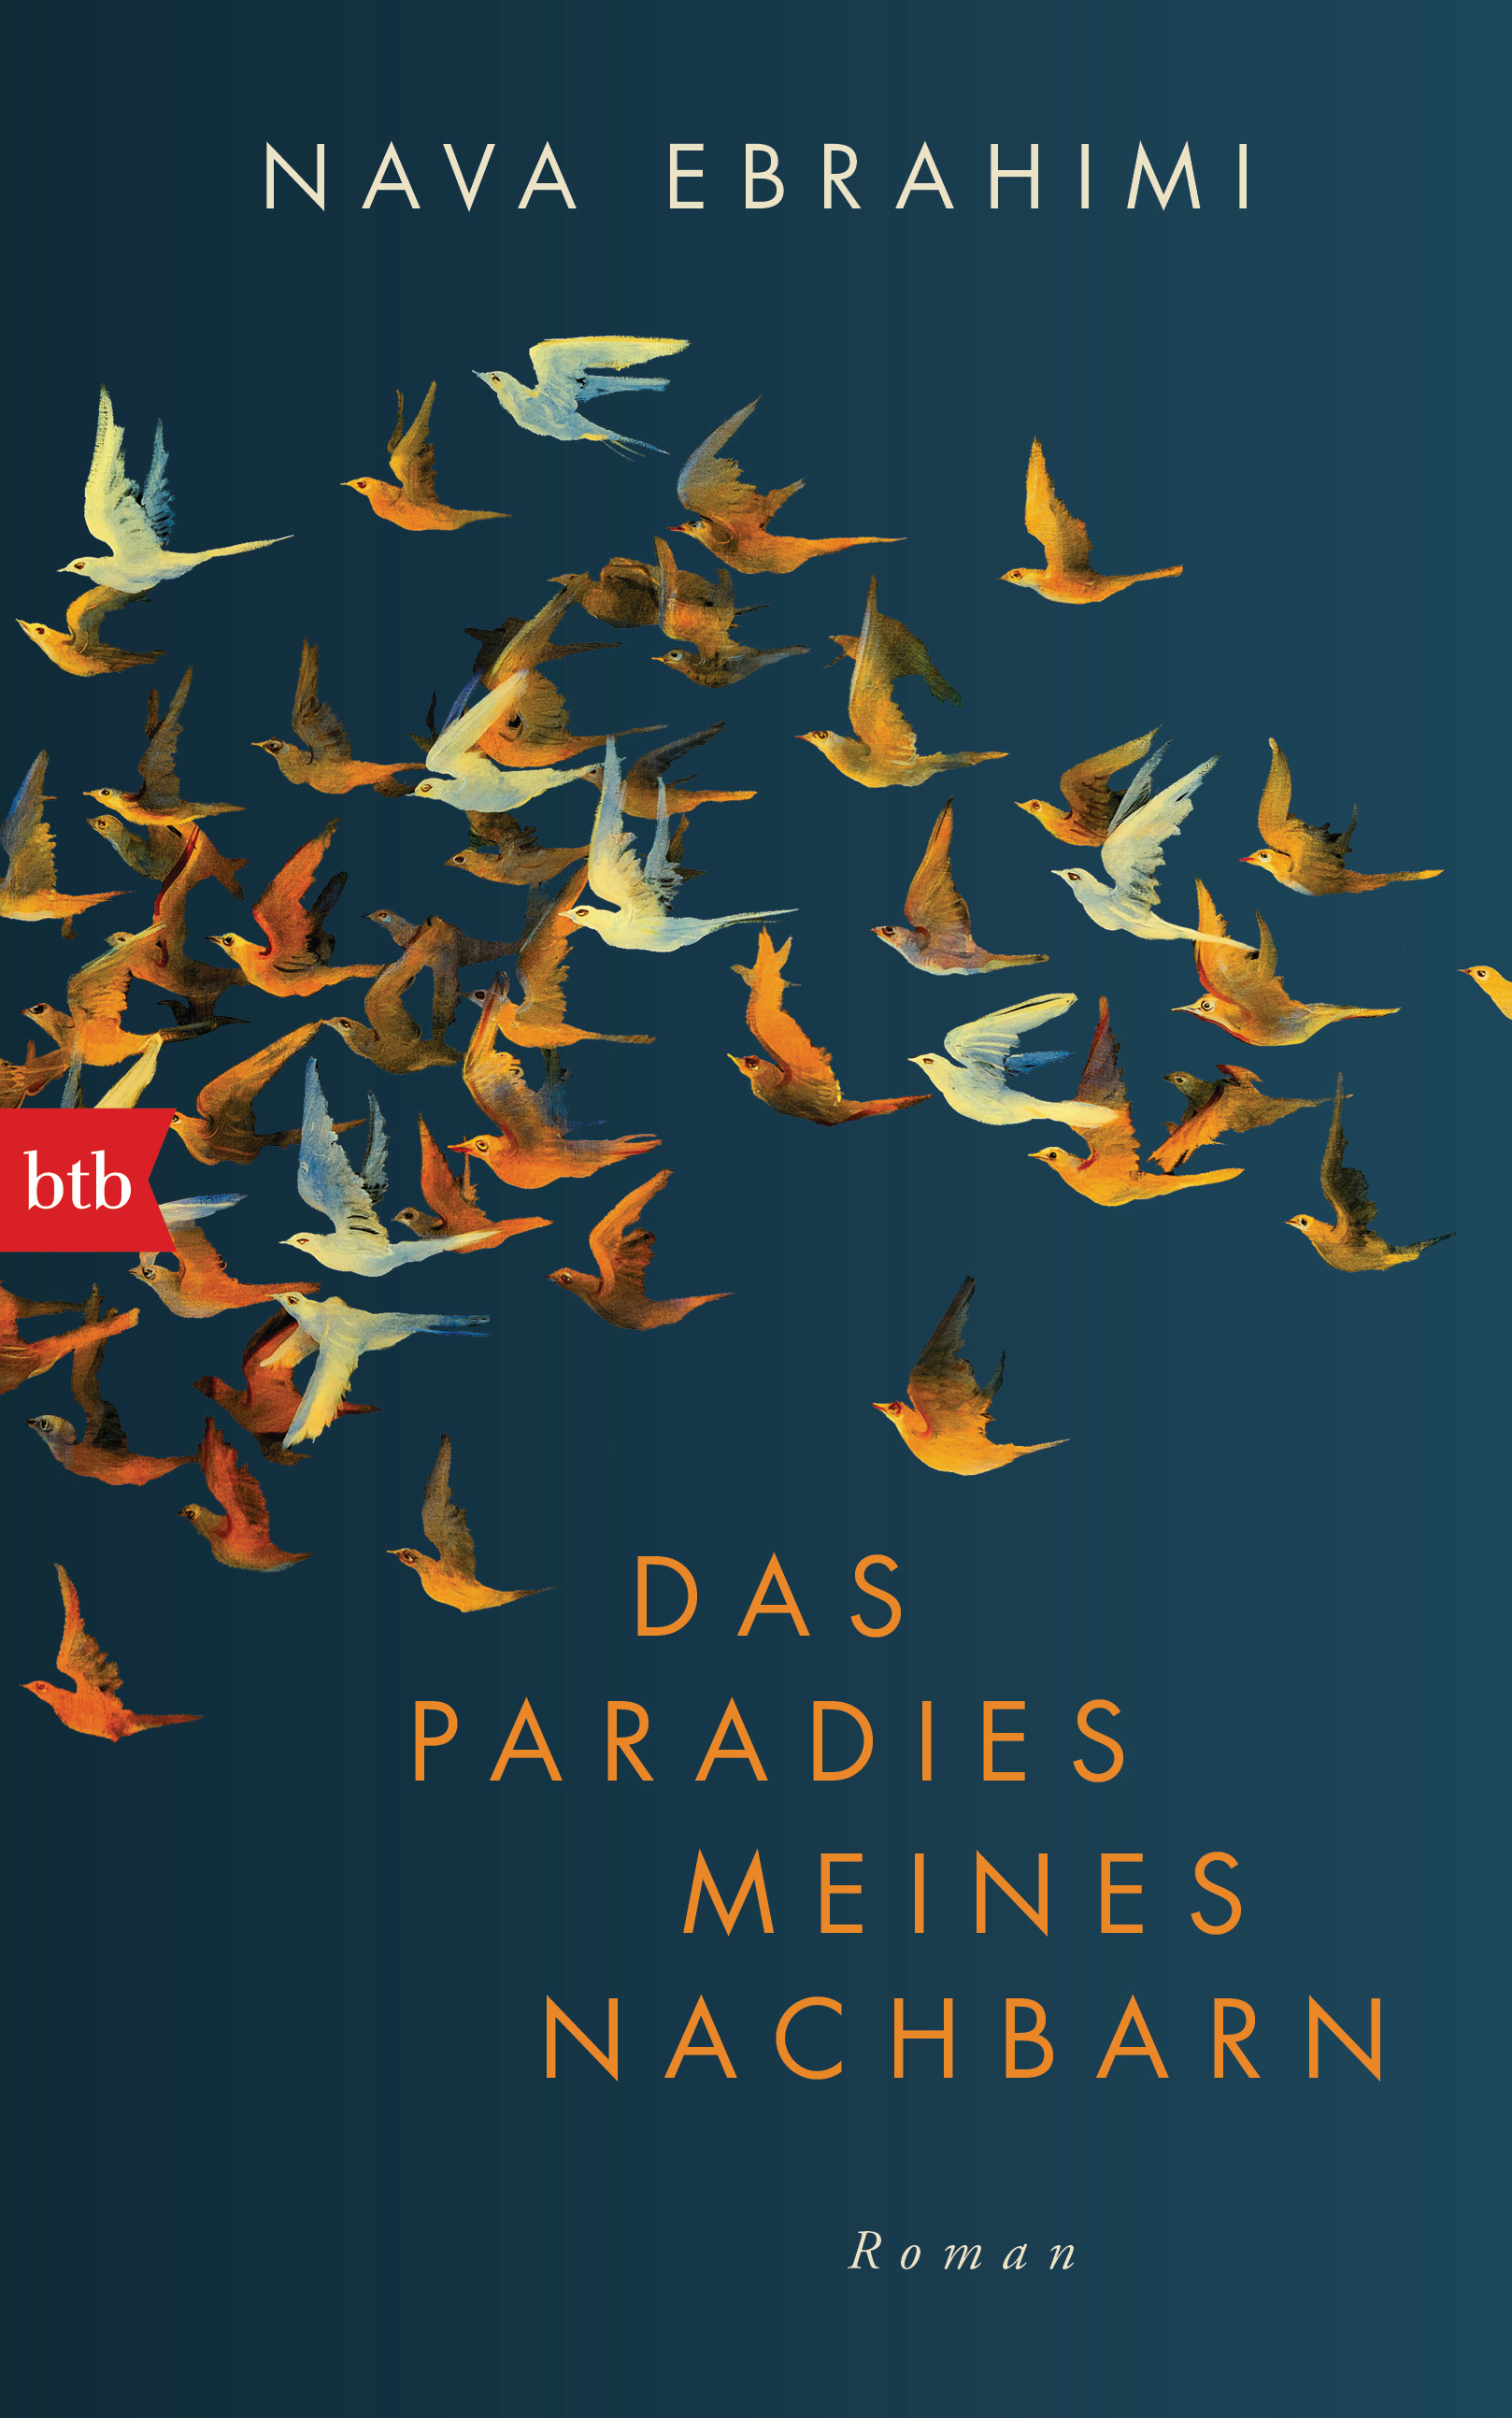 Cover of Nava Ebrahimi’s "Das Paradies meines Nachbarn" – My Neighbour’s Paradise (published in German by btb)